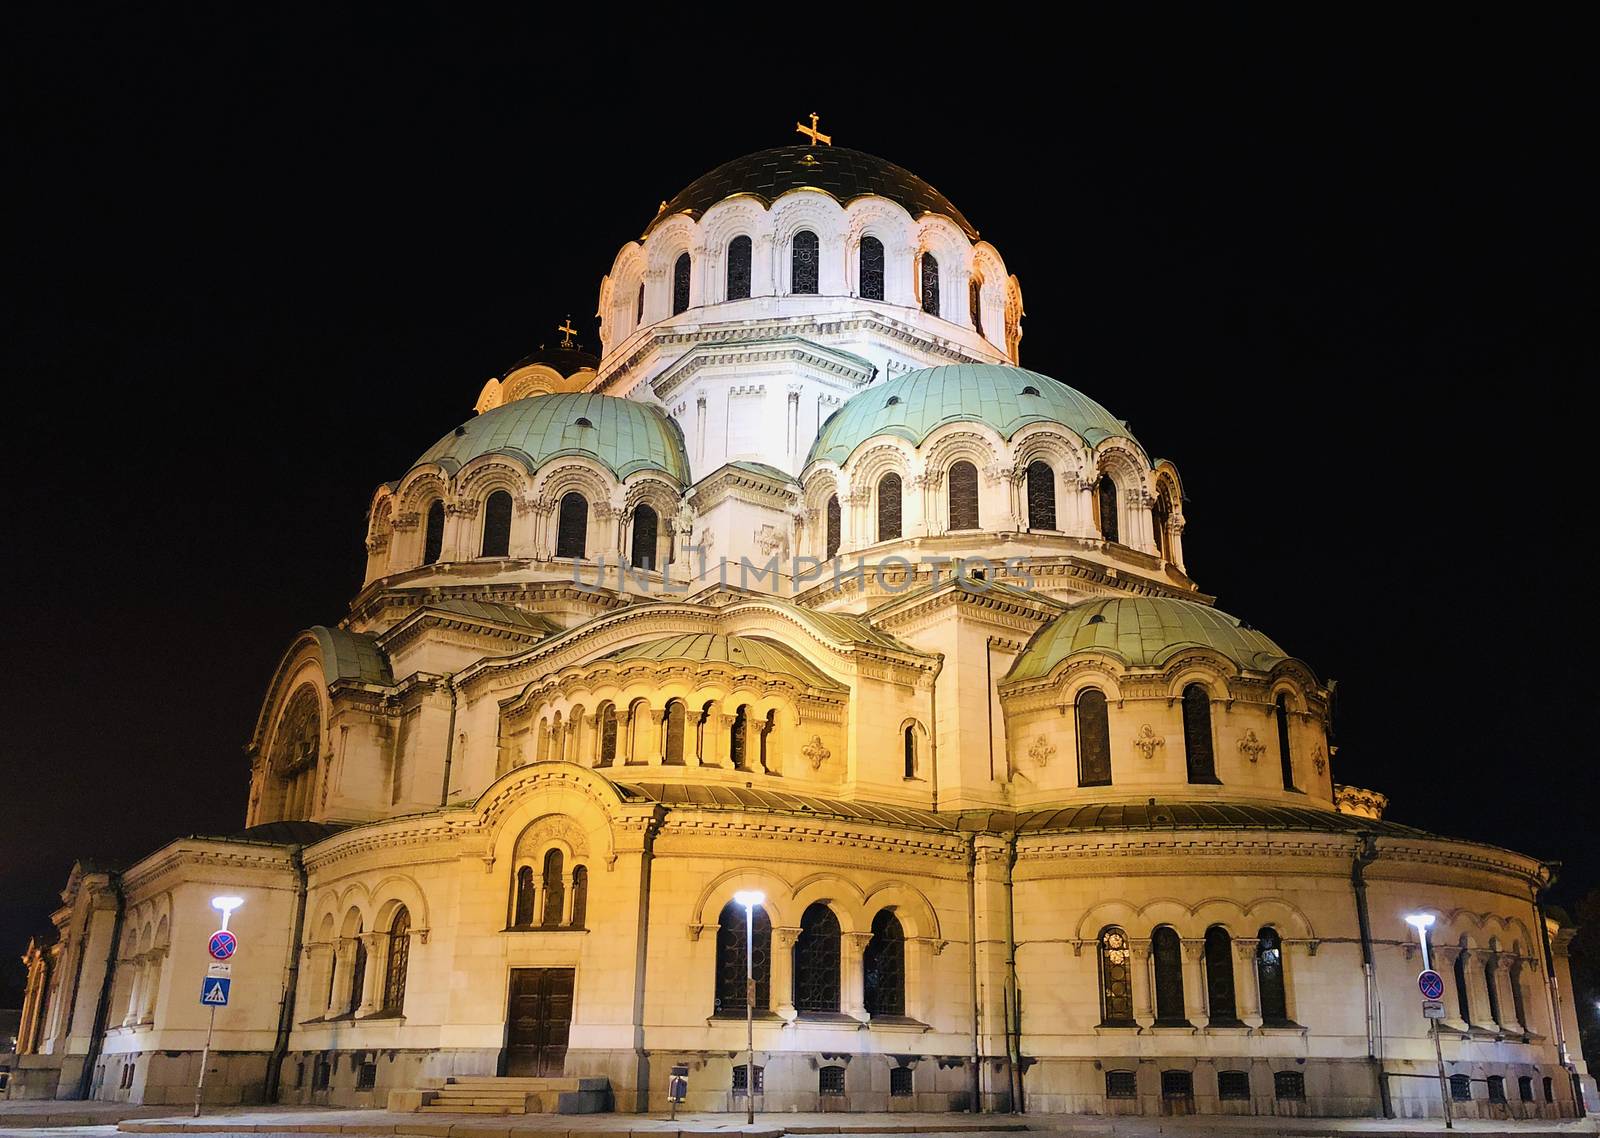 St. Alexander Nevsky Cathedrale in Sofia Bulgaria shot taken at night